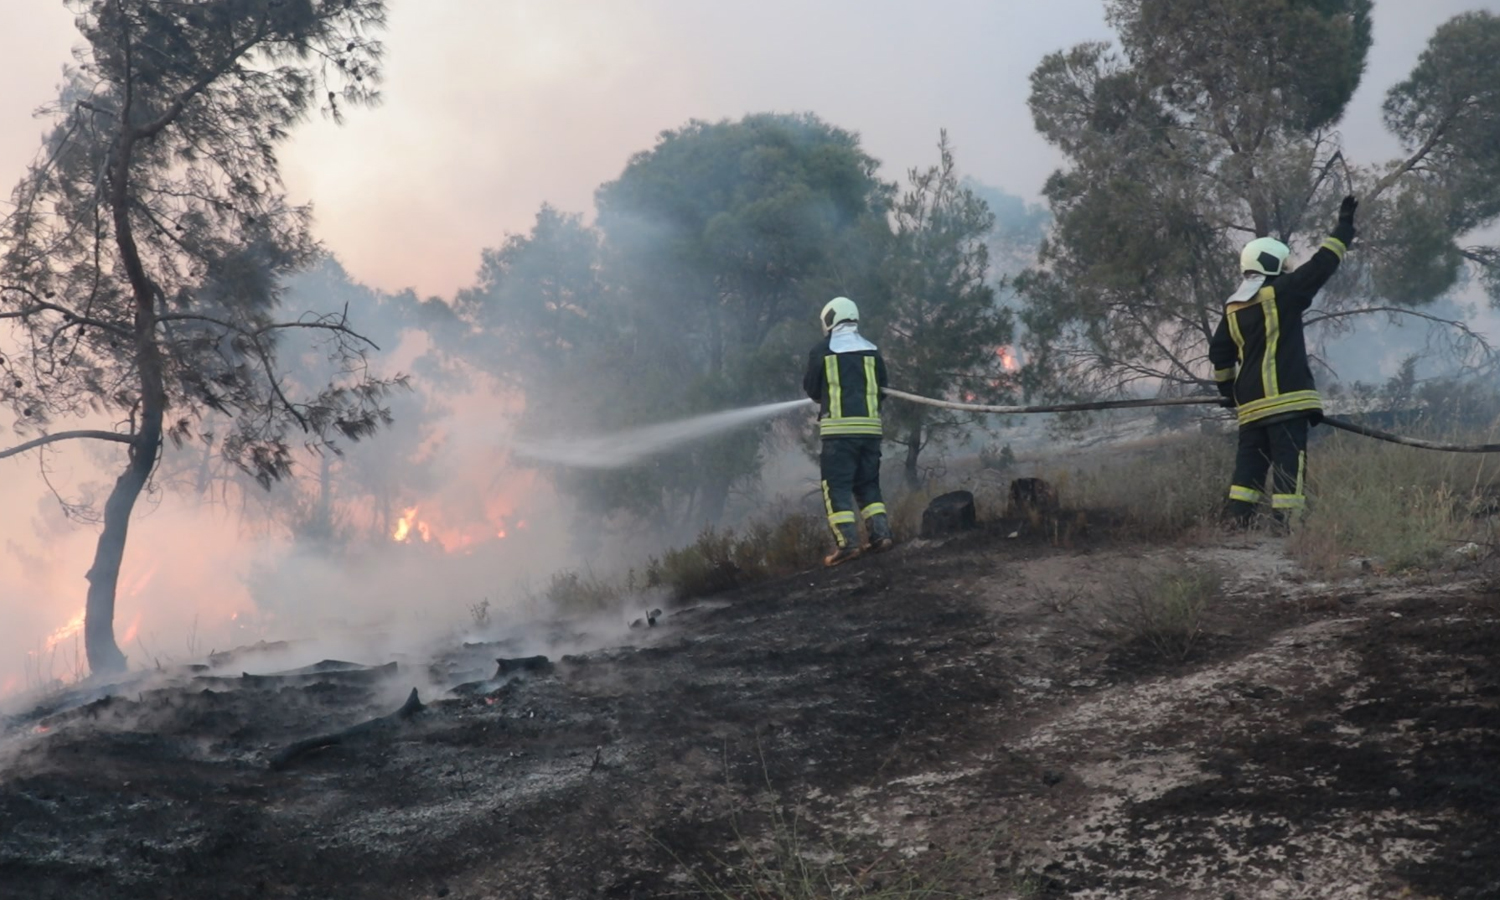 Civil Defense teams putting out a fire that hit northwestern Syria - 27 May 2021 (Syrian Civil Defense)